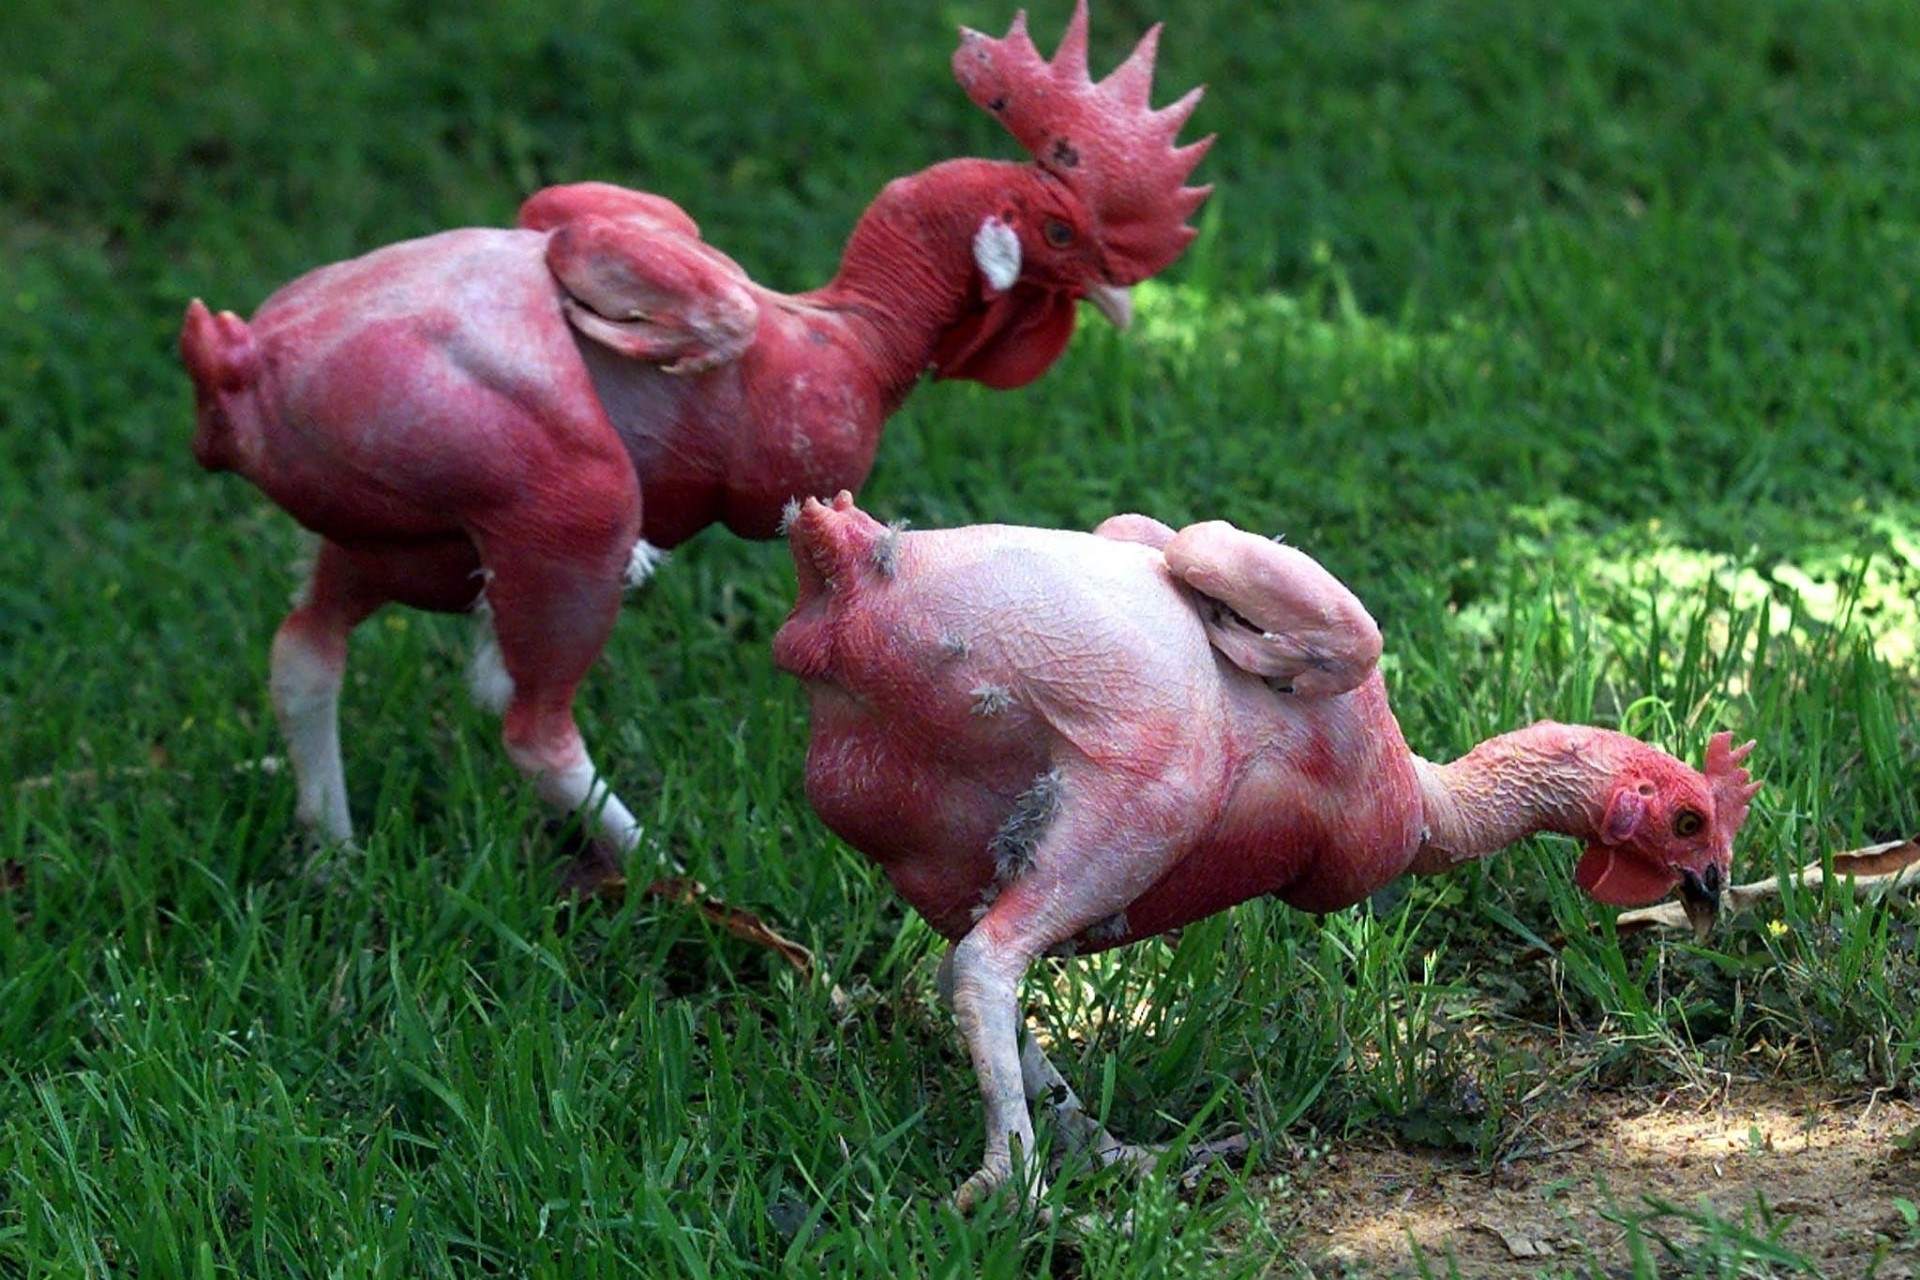 The Featherless Chicken: The Revolutionary Poultry Innovation That Failed To Take Flight